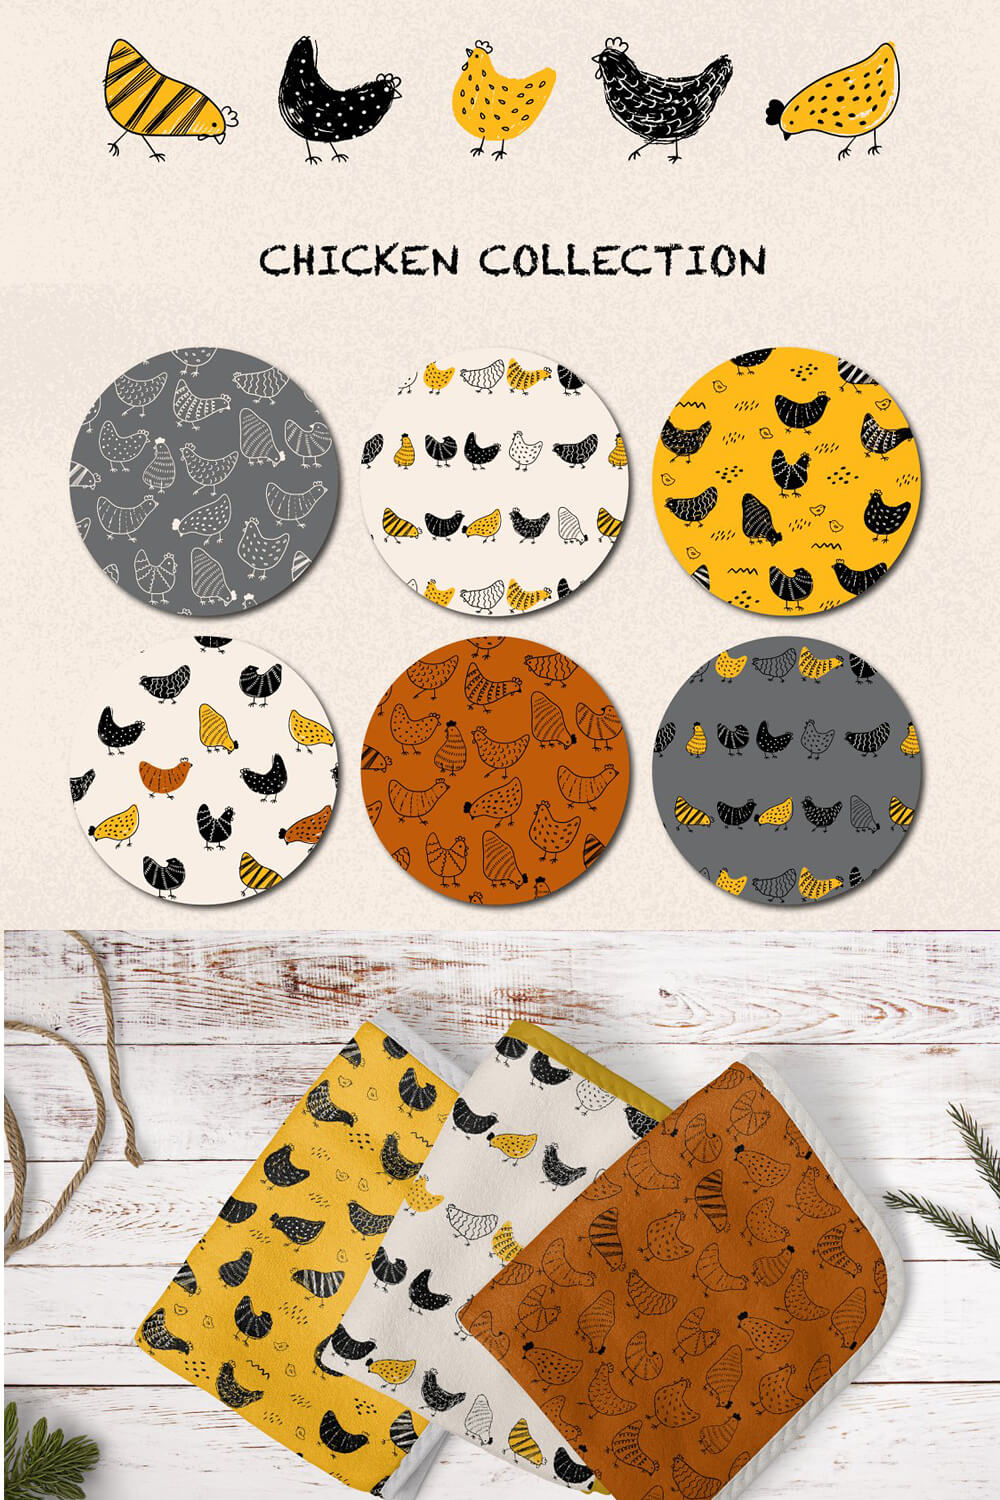 Chicken collection and options for using this collection.